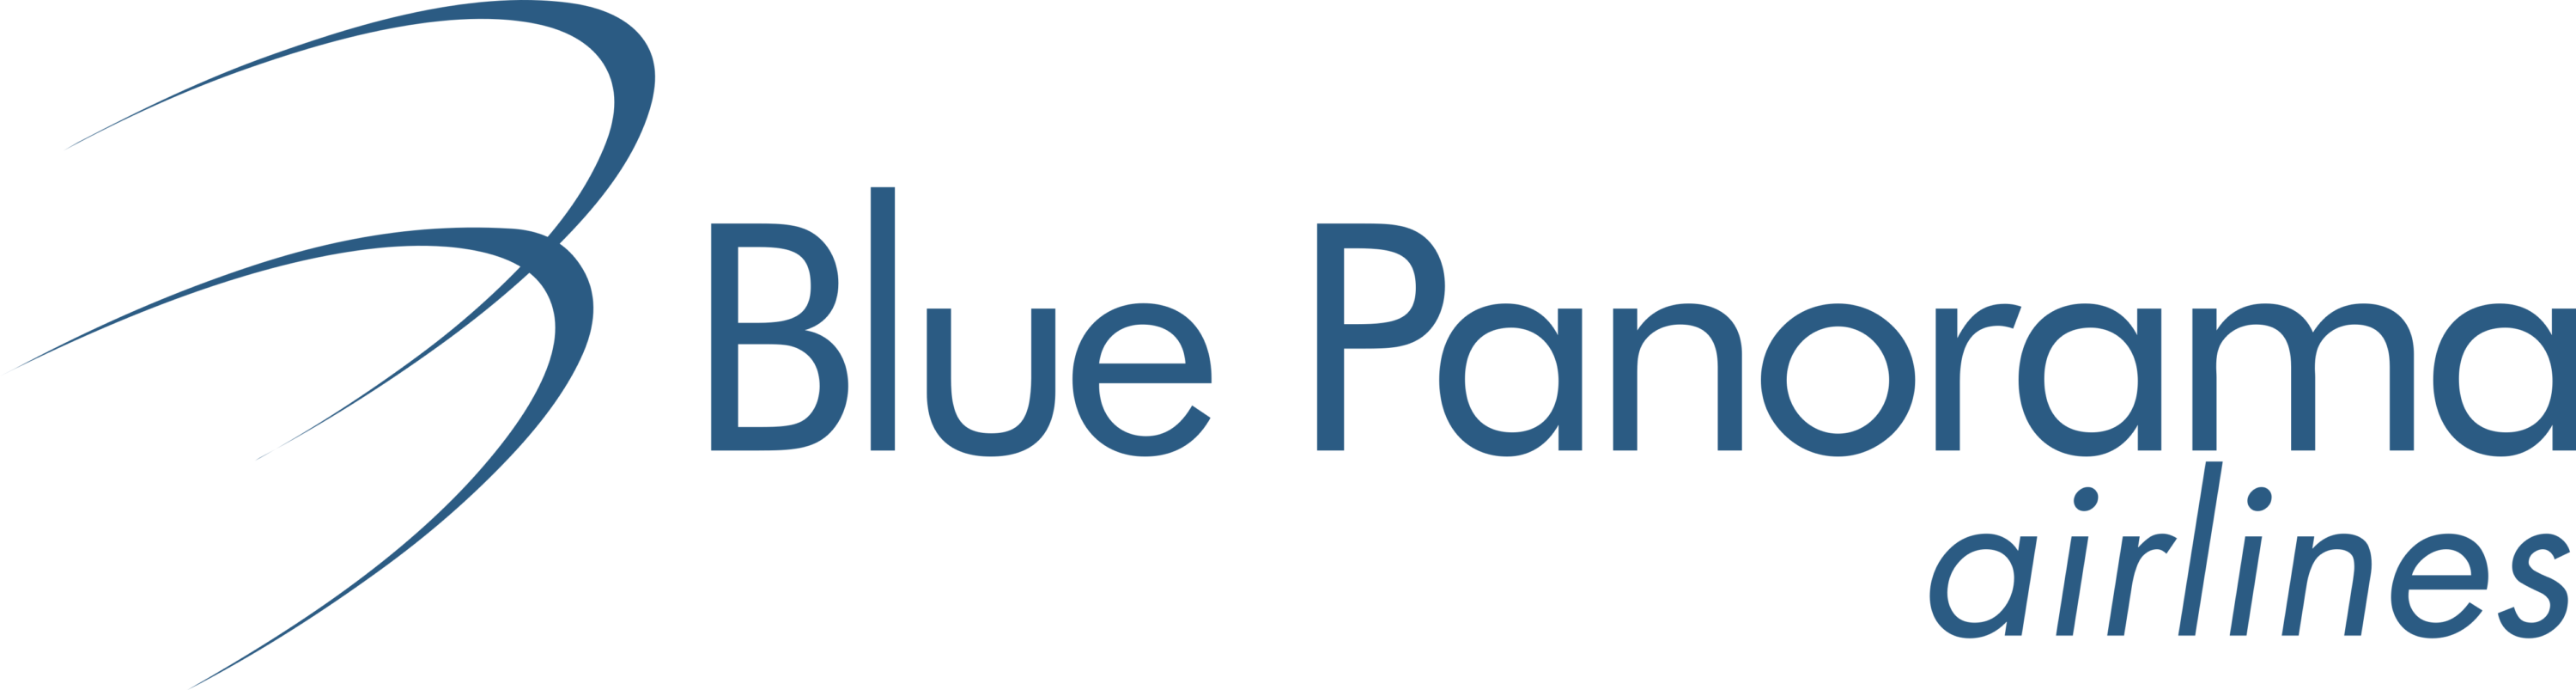 Blue Panorama Airlines Logo